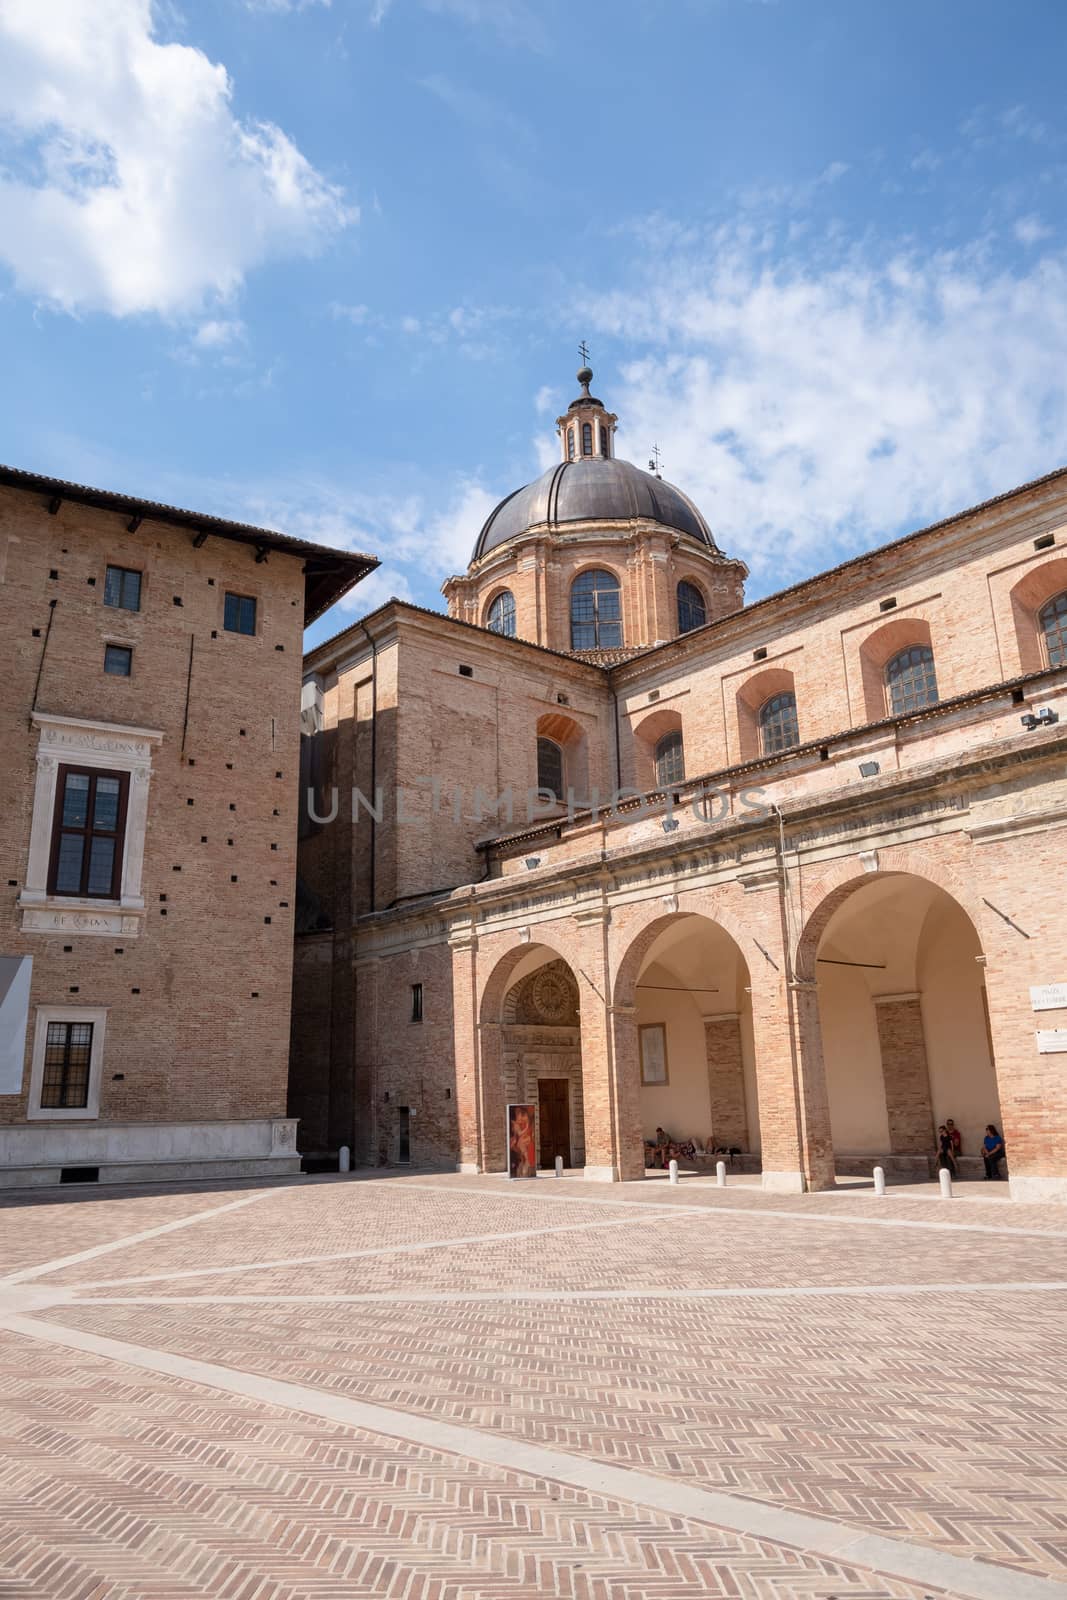 An image of the Piazza Duca Federico in Urbino